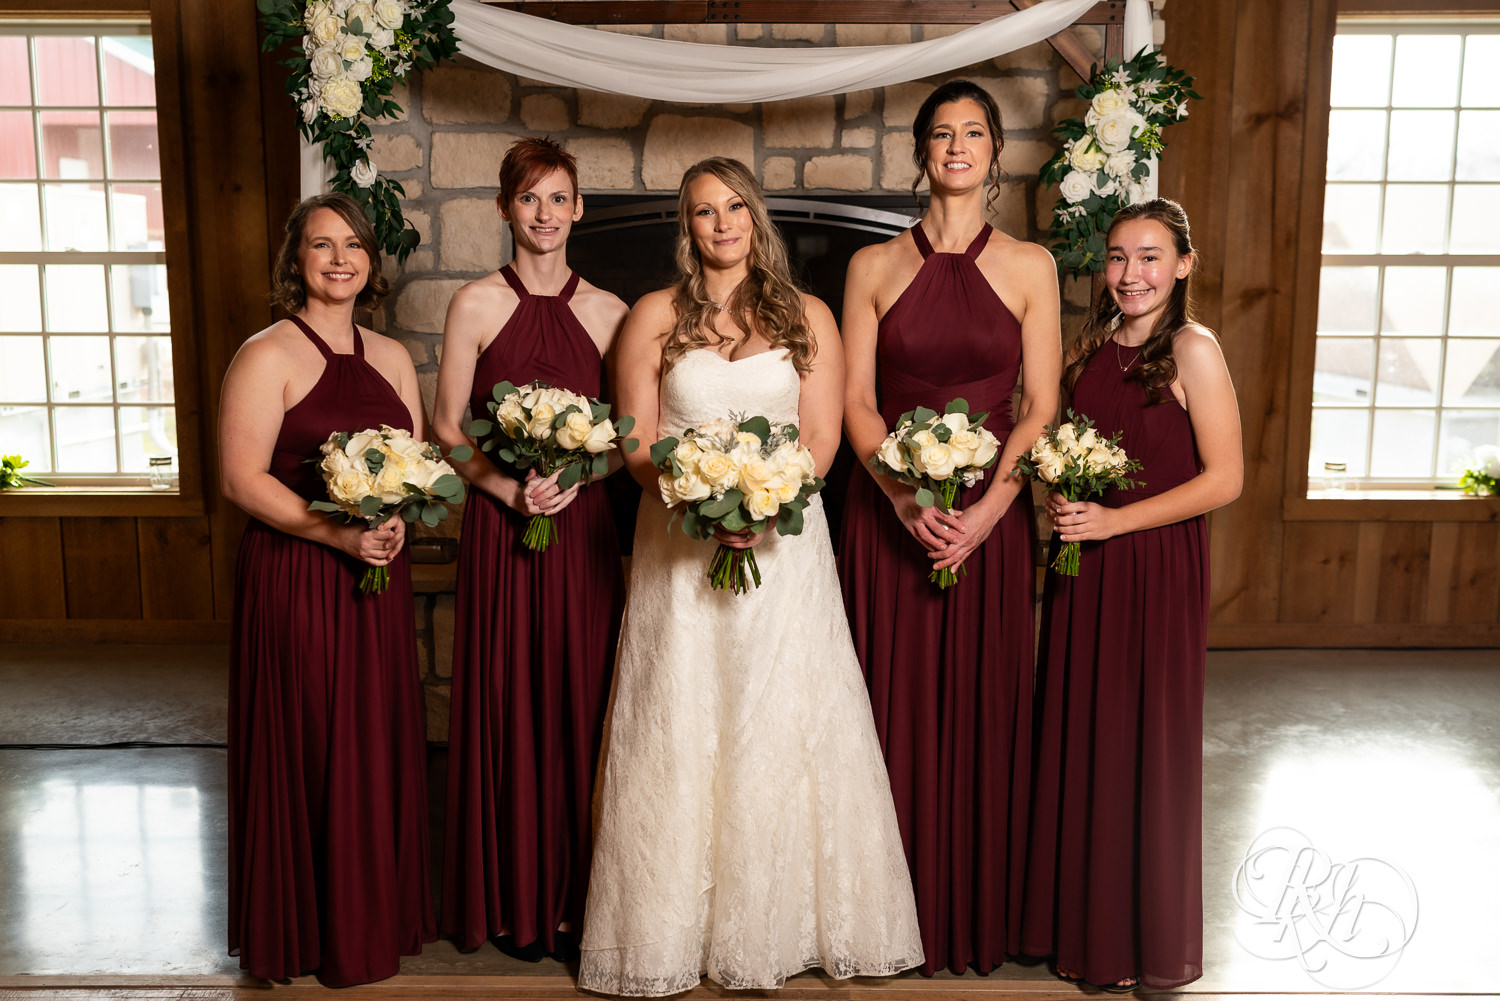 Bride smiles with wedding party at Almquist Farm in Hastings, Minnesota.